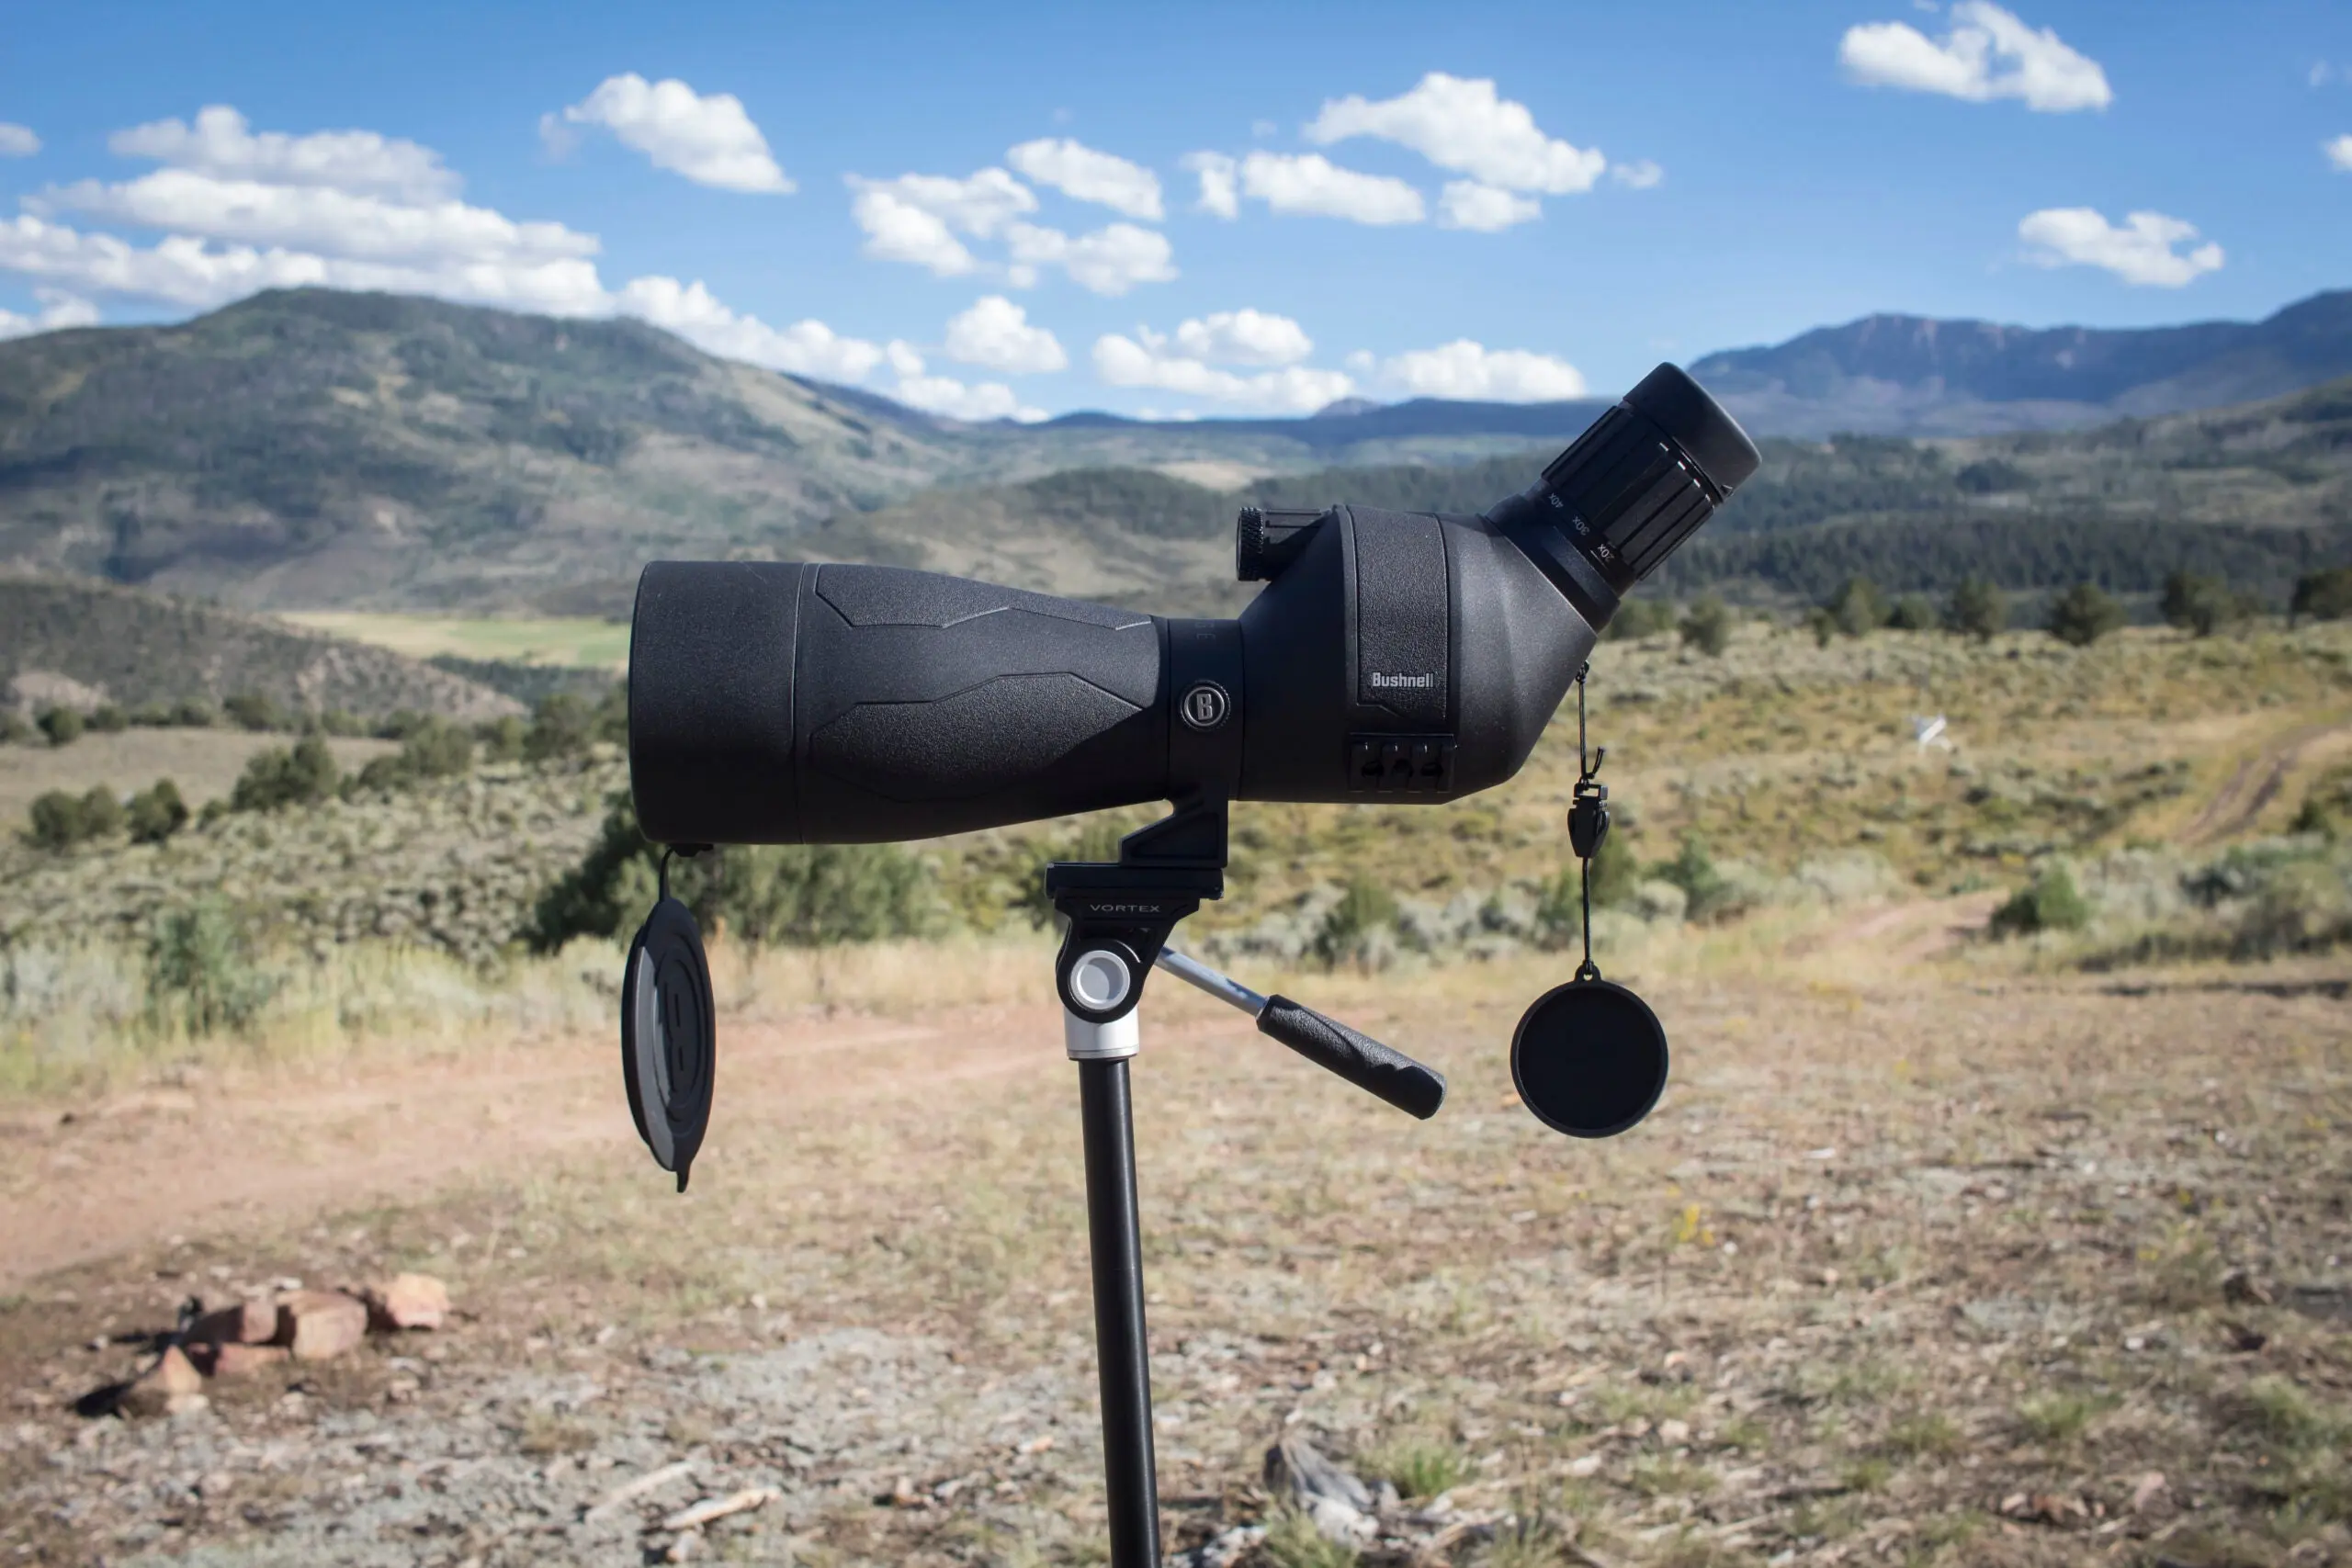 Bushnell Engaged DX spotting scope on tripod with mountains in the background